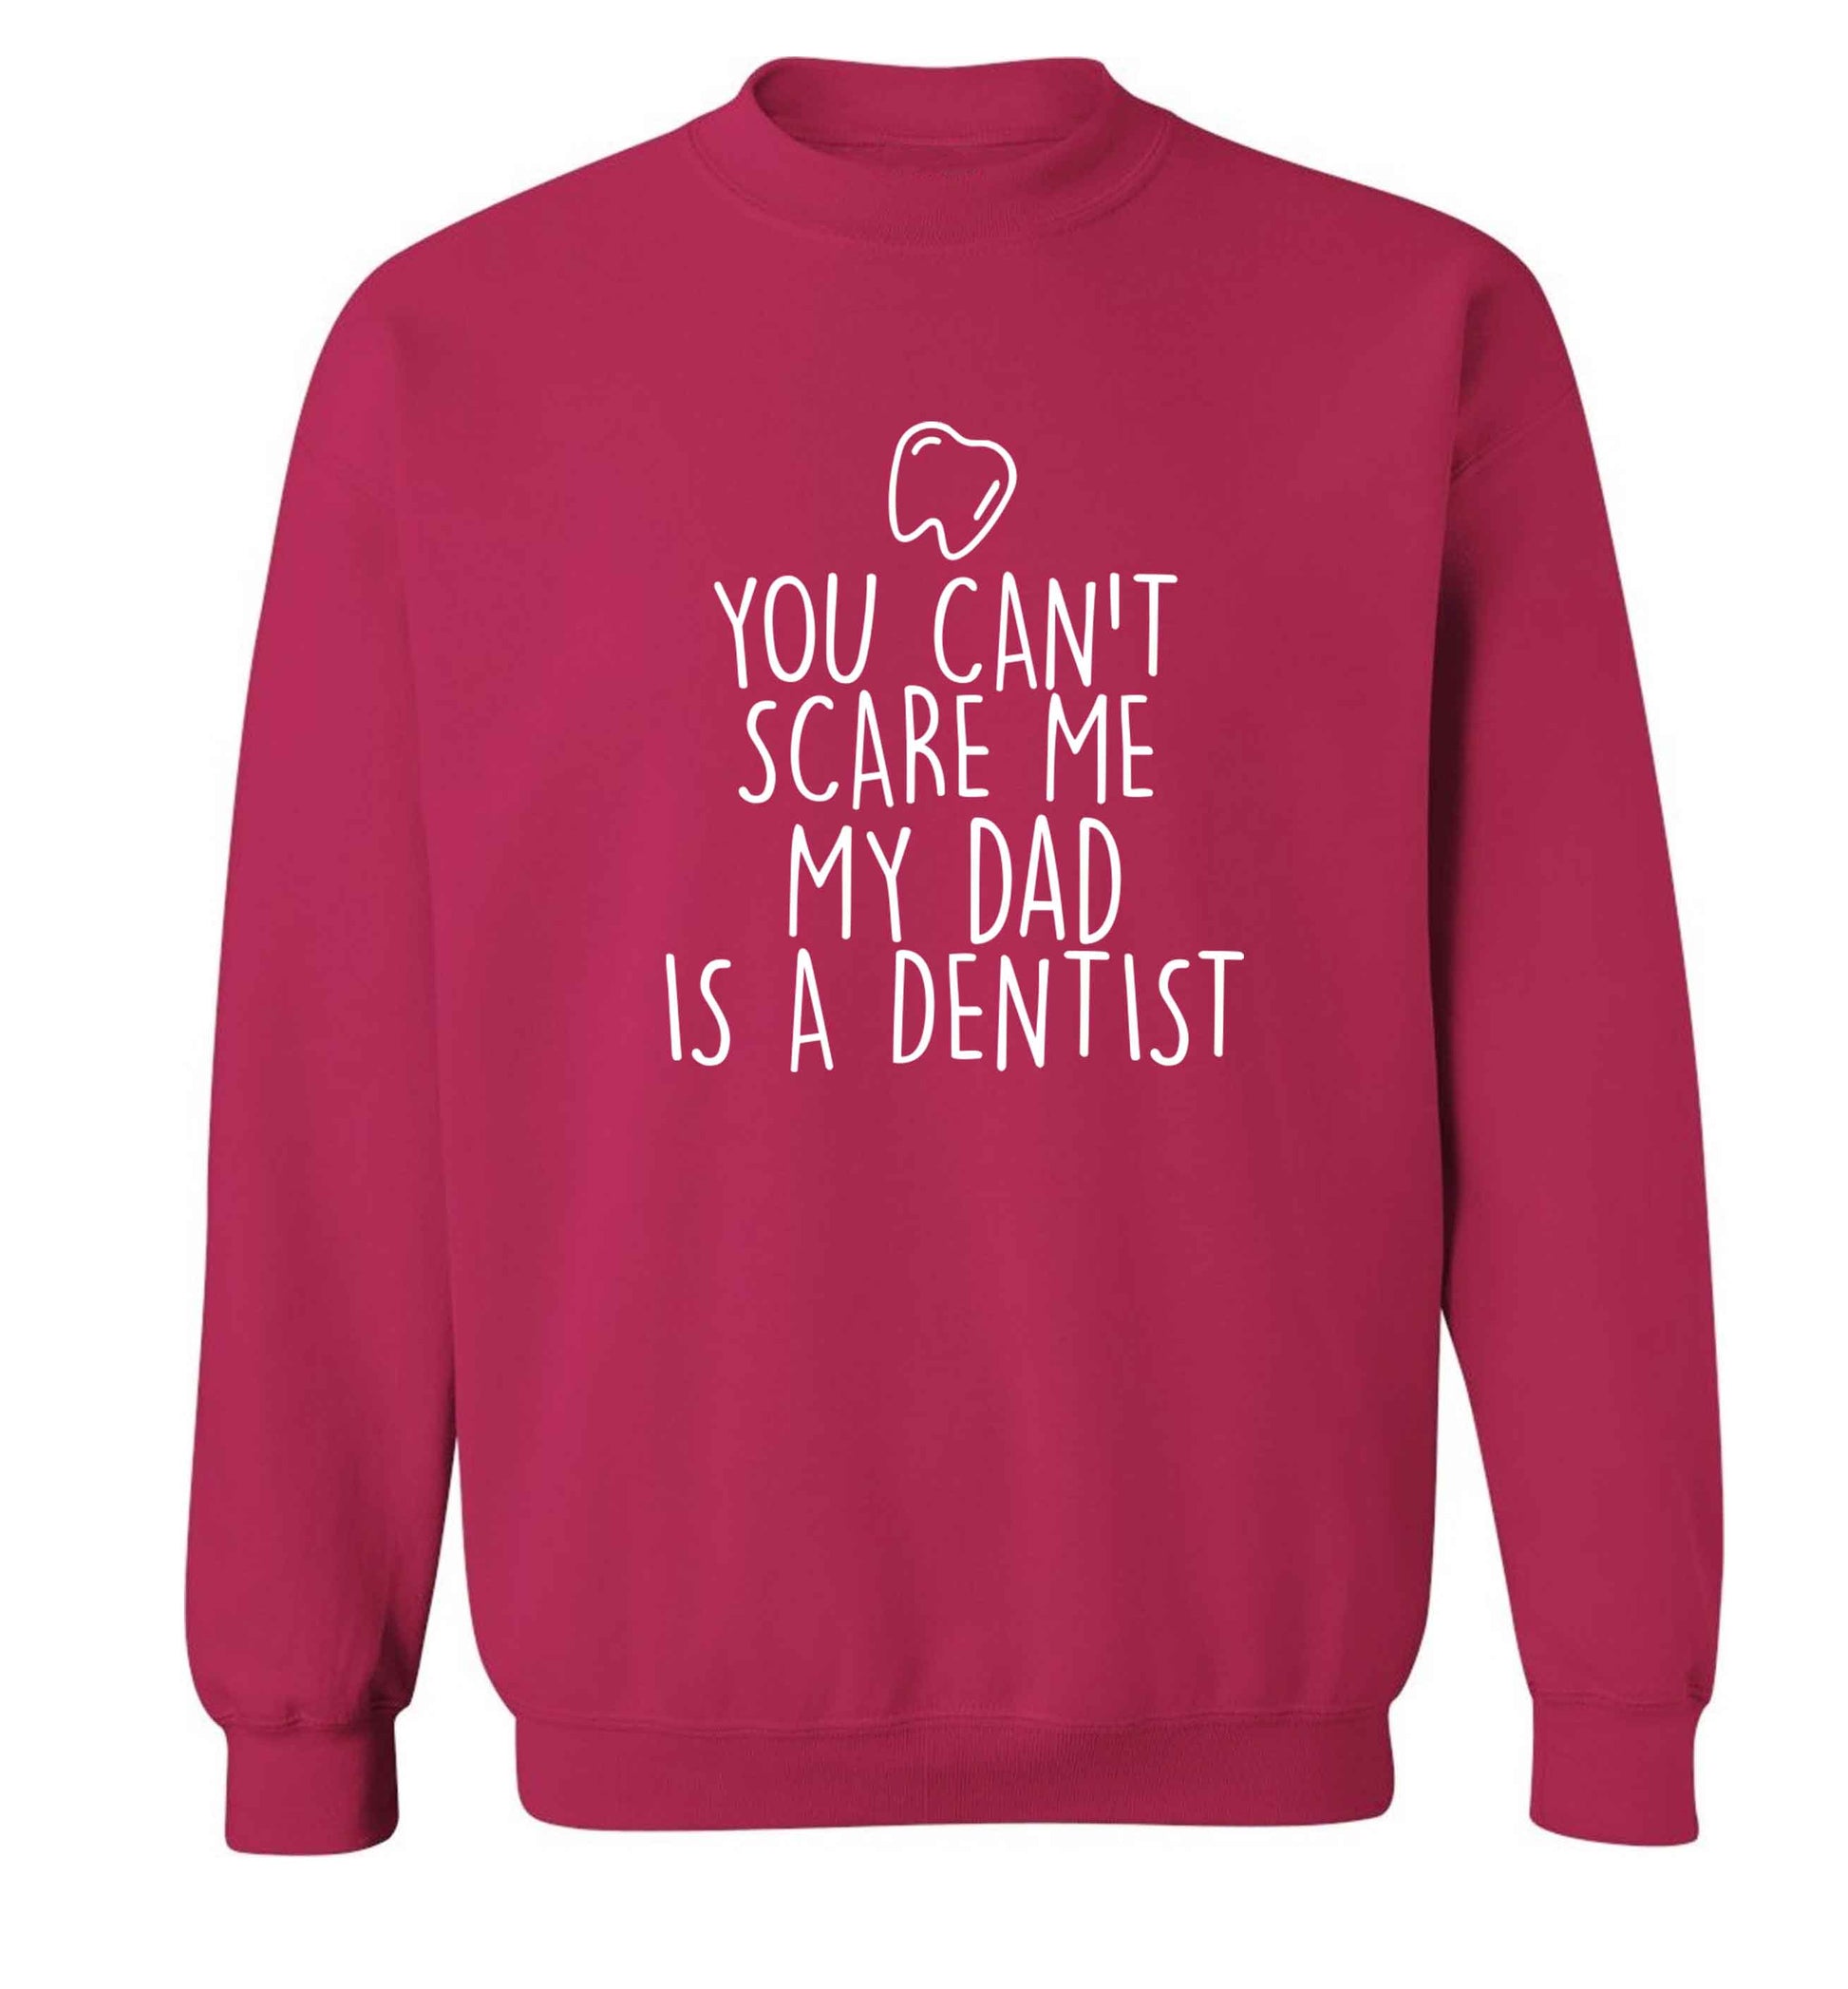 You can't scare me my dad is a dentist adult's unisex pink sweater 2XL